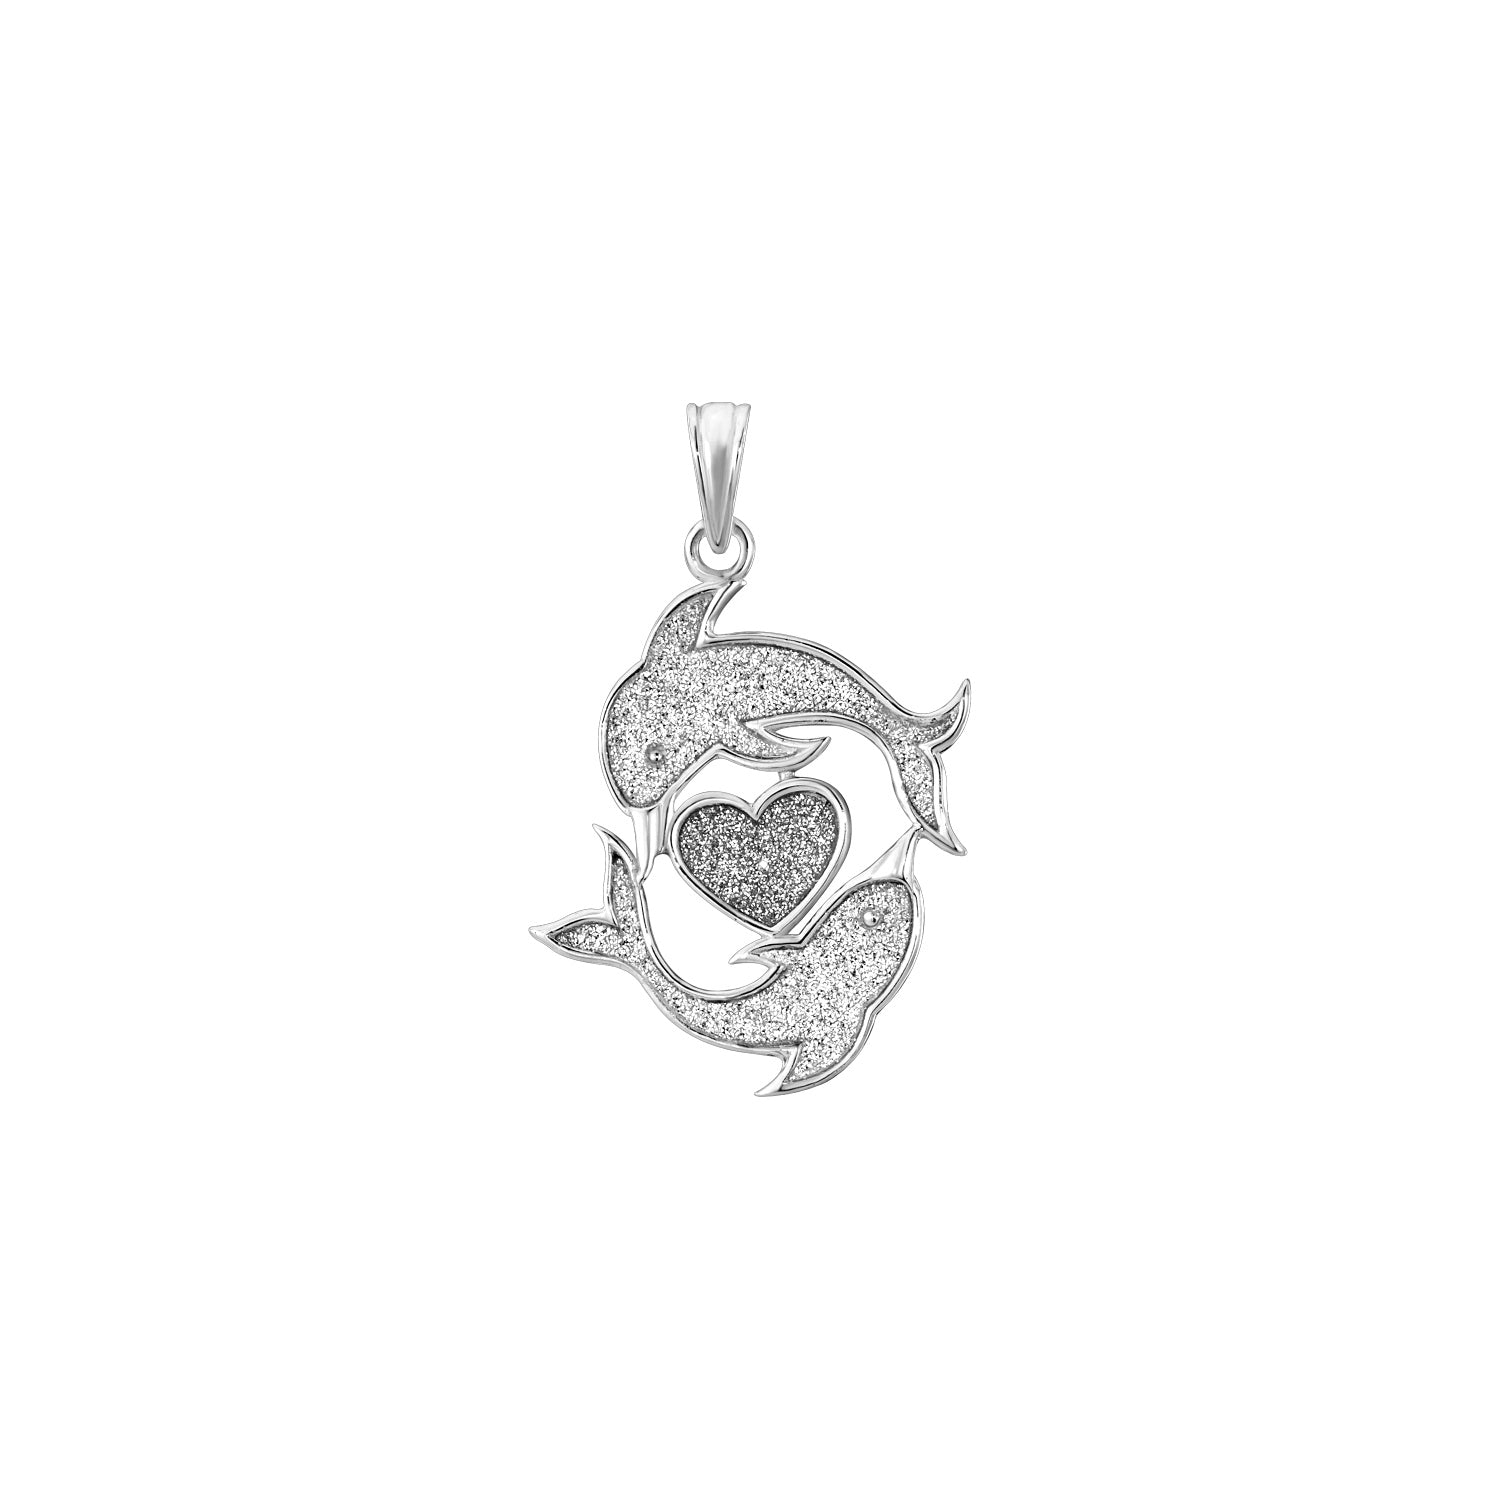 925 STERLING SILVER DOLPHINS PENDANT CHARM WITH GLITTER F75170